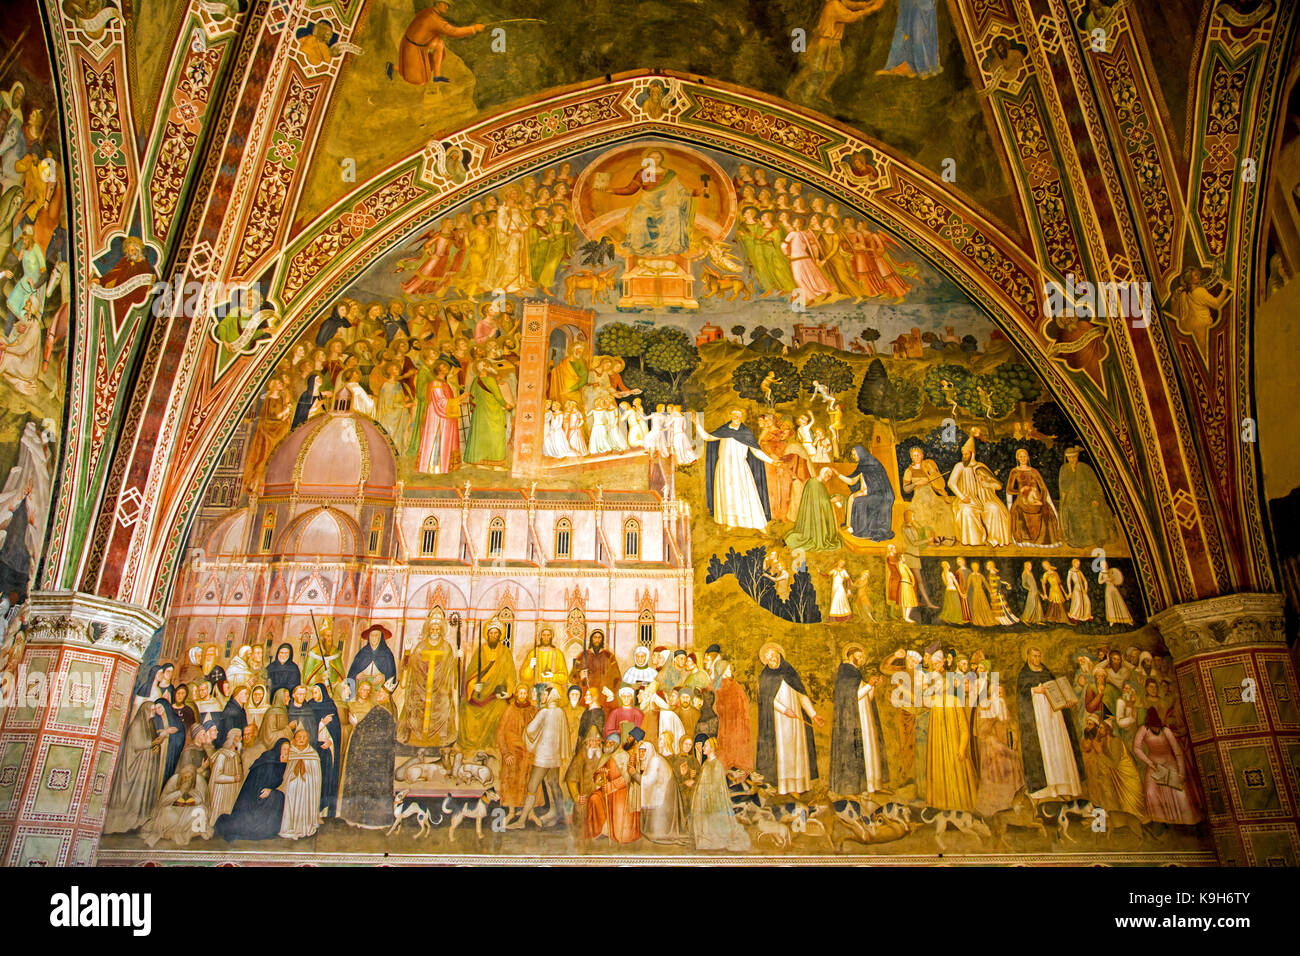 The Church Militant and the Church Triumphant by Andrea di Buonaiuto in the Spanish Chapel section of Santa Maria Novella church in Florence Italy Stock Photo